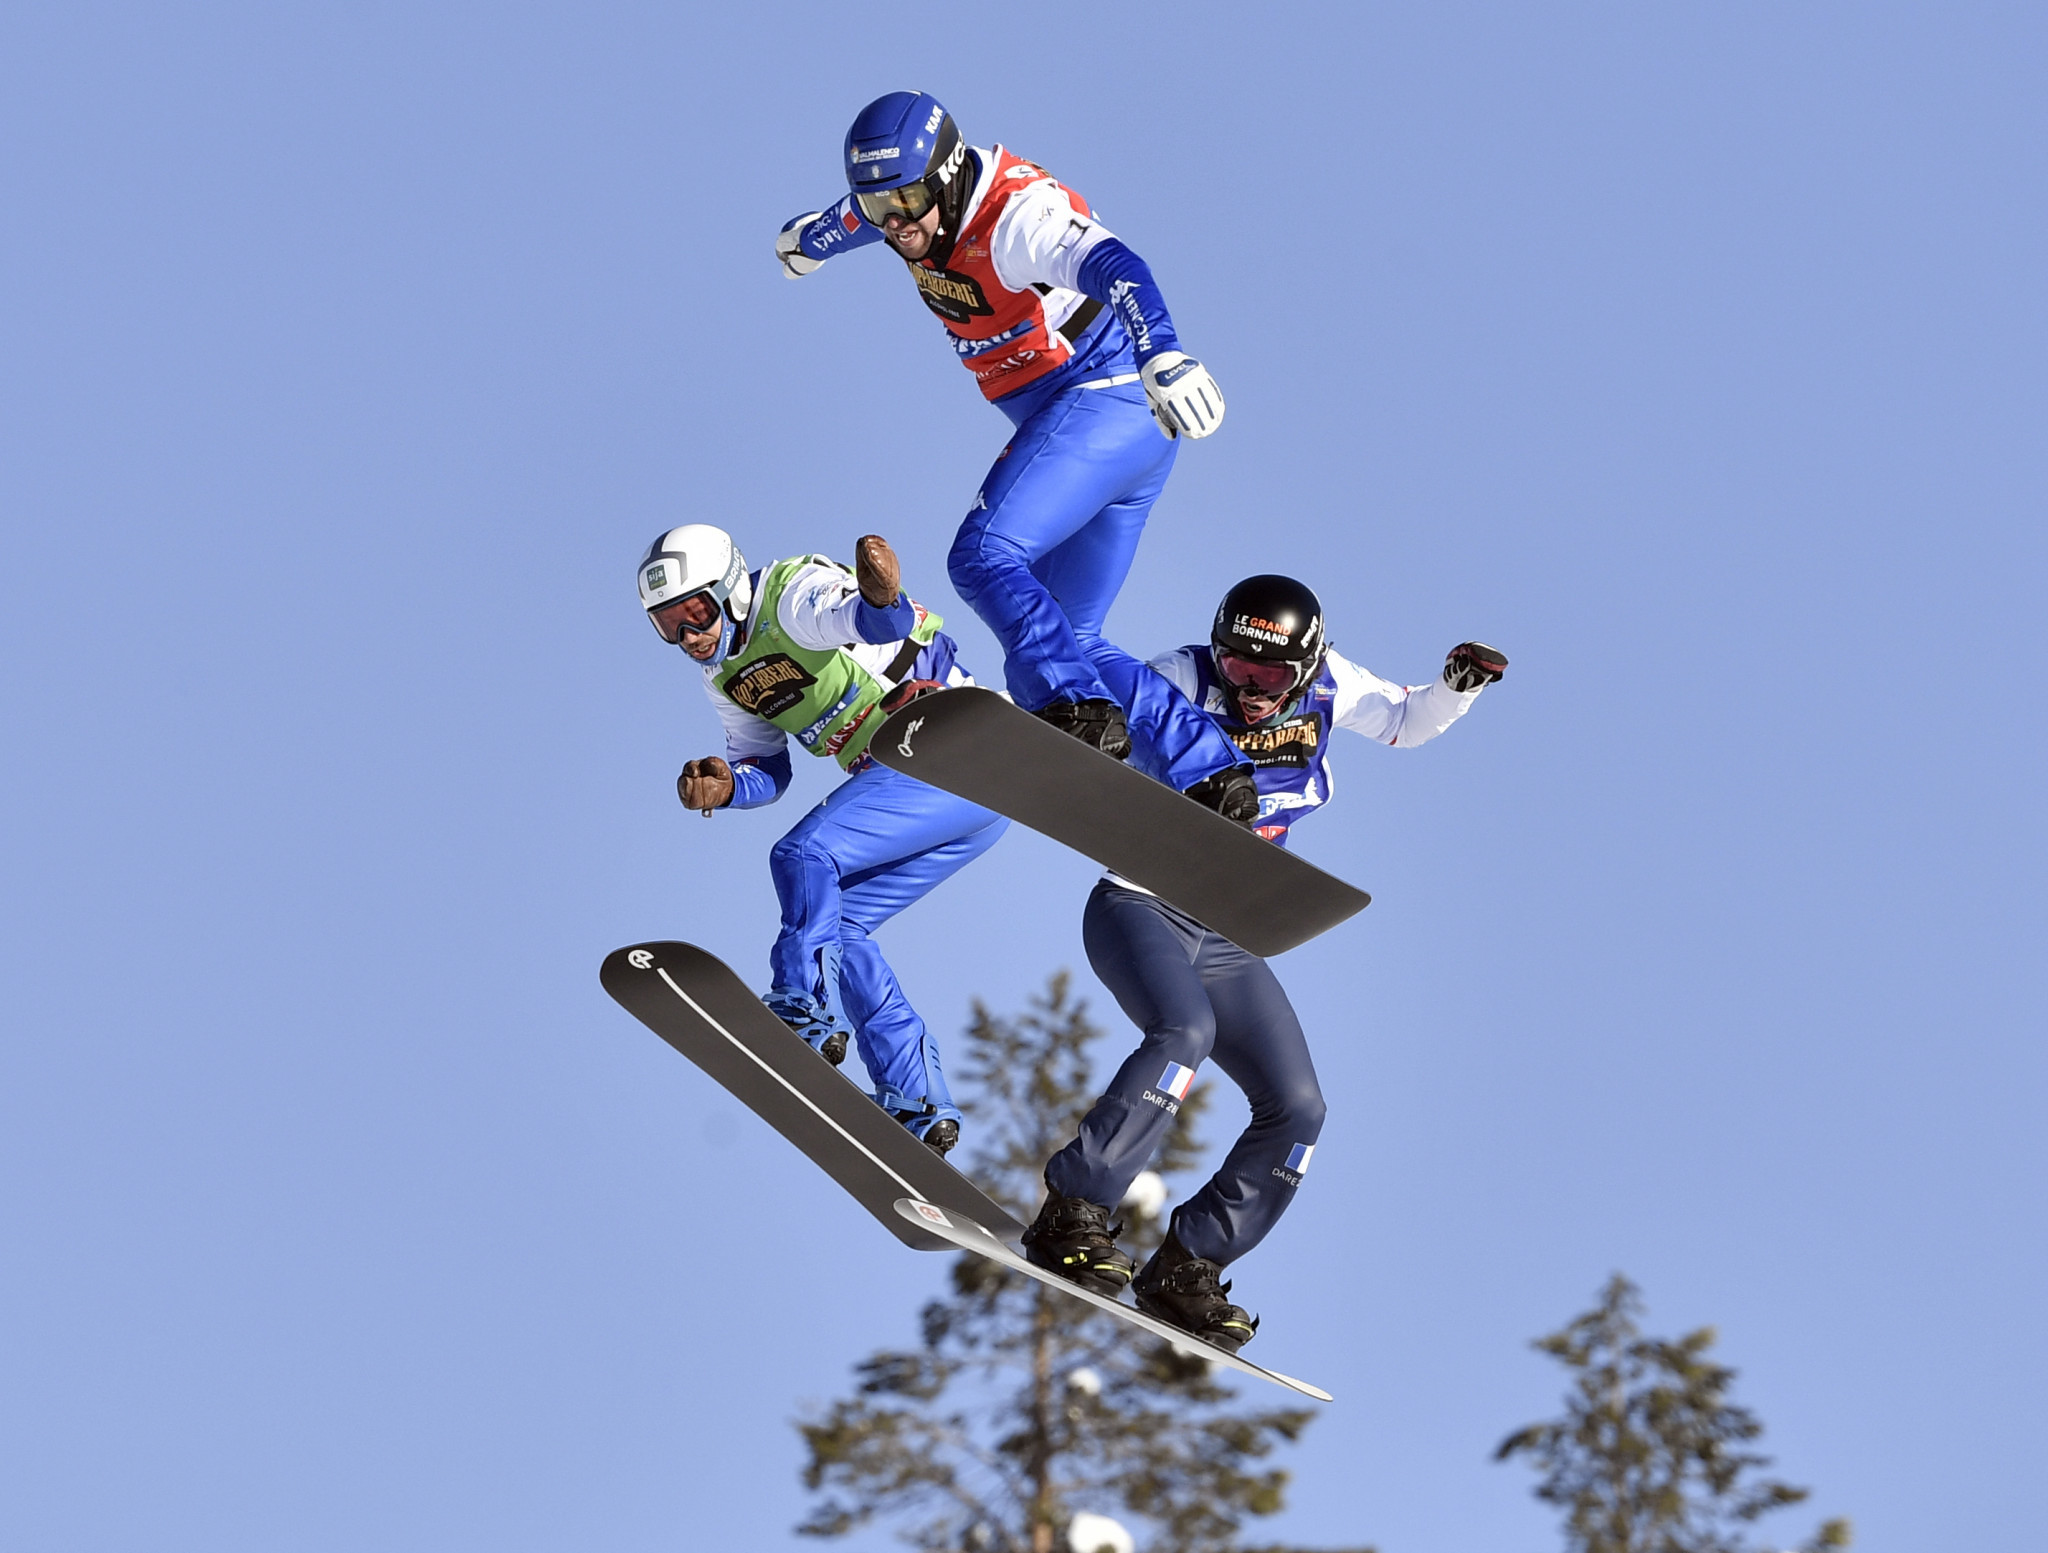 Bakuriani in Georgia is due to host back-to-back Snowboard Cross World Cup ©Getty Images